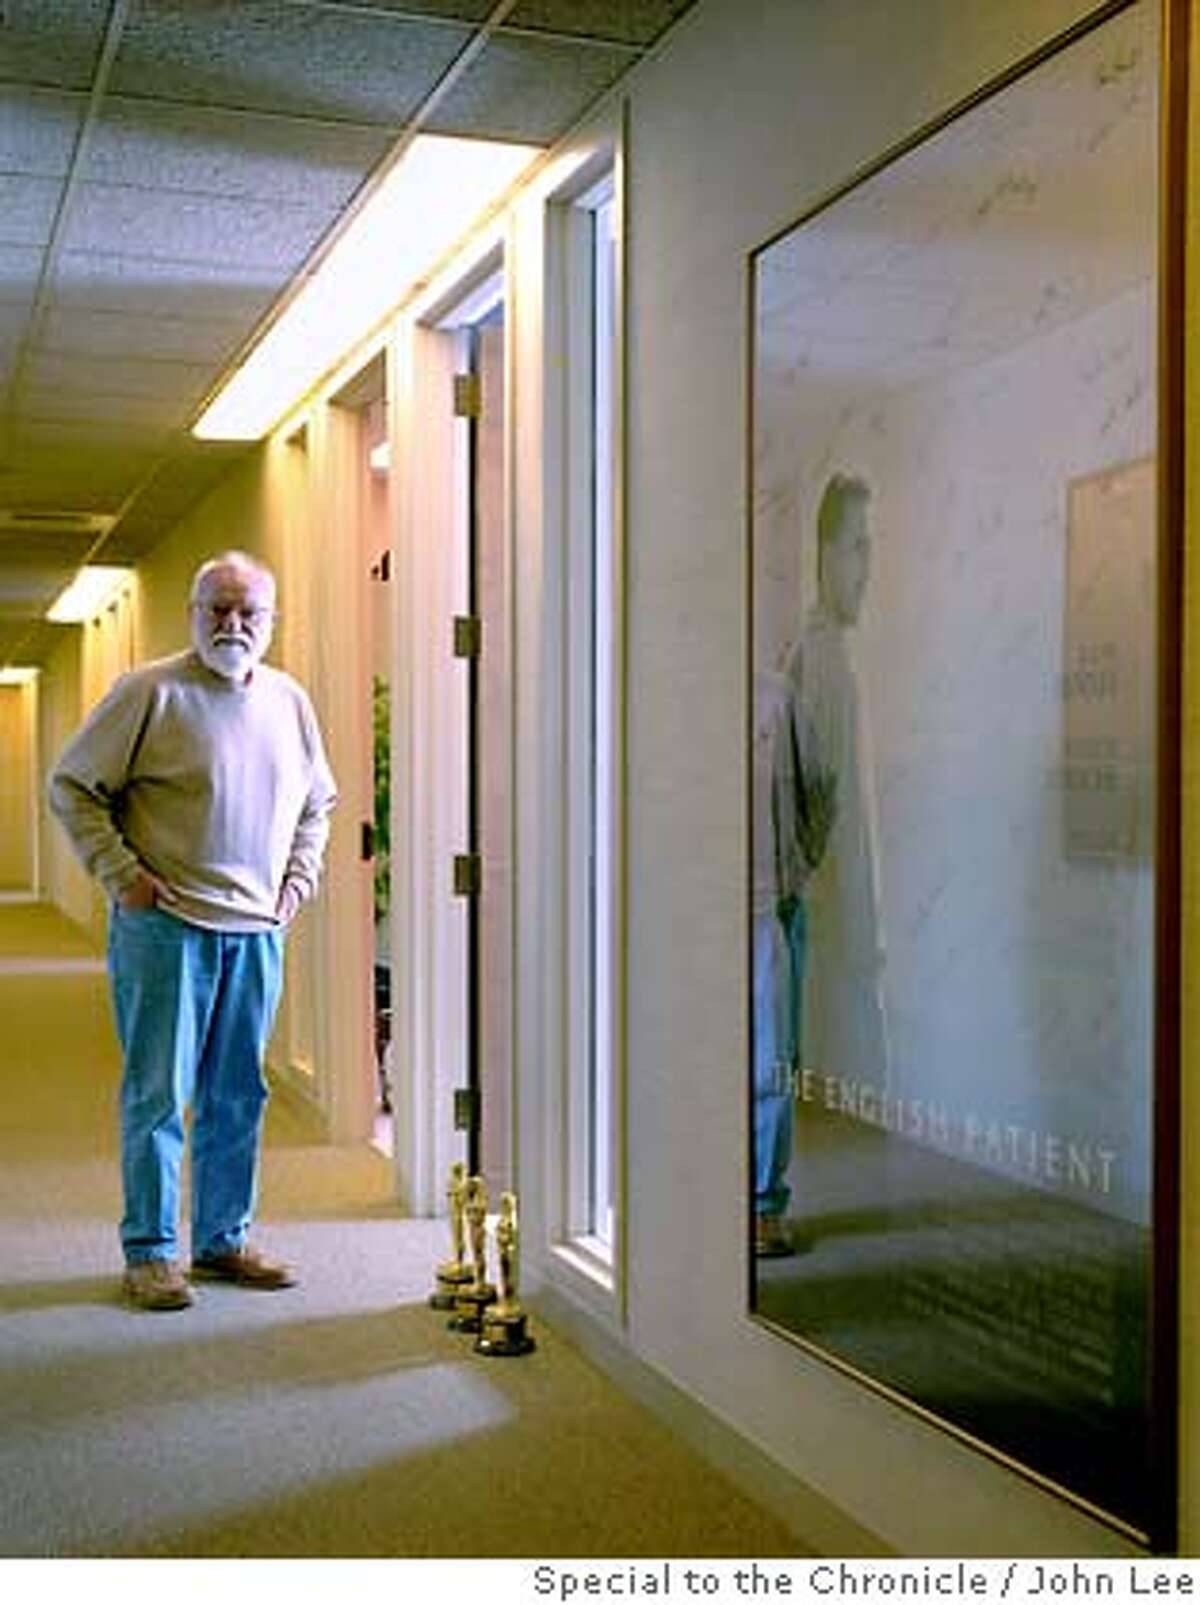 � ZAENTZ_06_JOHNLEE.JPG Three-time Academy Award winning film producer Saul Zaentz (cq), in a hallway of his Berkeley office on July 11, 2007. Next to Zaentz hangs a giant poster of The English Patient, one of the three movies he produced which won in the Academy Awards' best picture category. By JOHN LEE/SPECIAL TO THE CHRONICLE